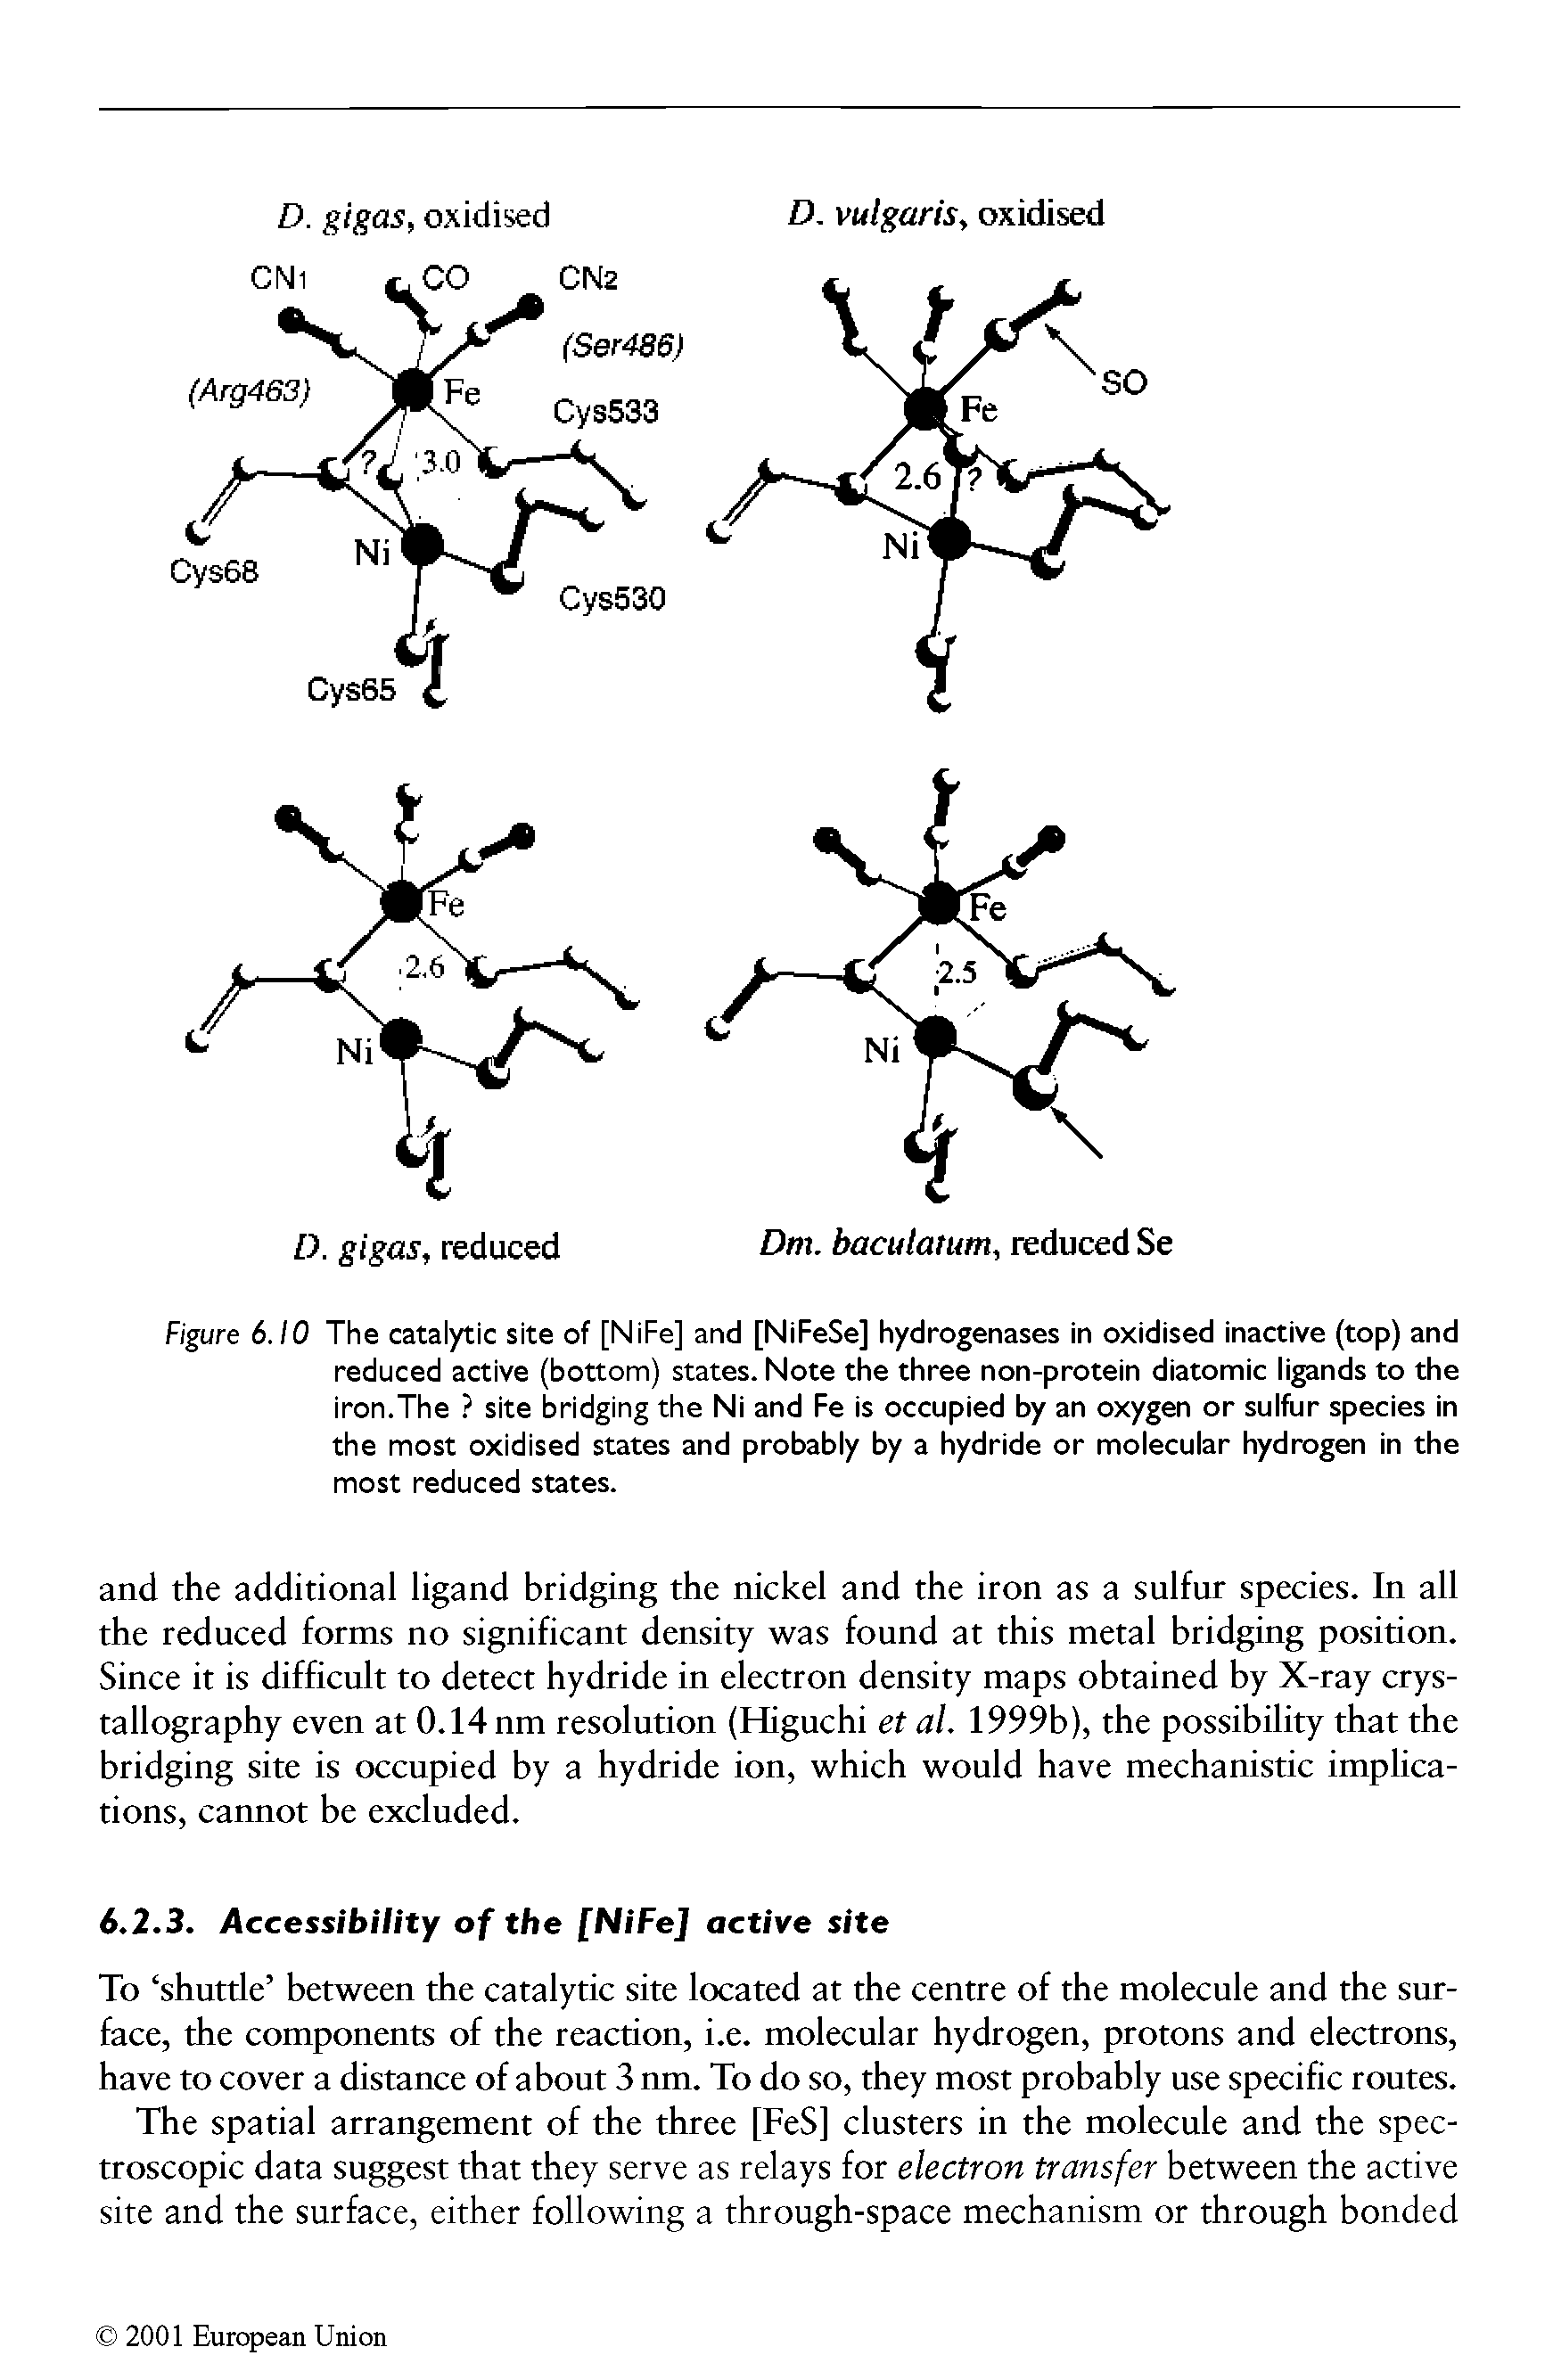 Figure 6.10 The catalytic site of [NiFe] and [NiFeSe] hydrogenases in oxidised inactive (top) and reduced active (bottom) states. Note the three non-protein diatomic ligands to the iron.The site bridging the Ni and Fe is occupied by an oxygen or sulfur species in the most oxidised states and probably by a hydride or molecular hydrogen in the most reduced states.